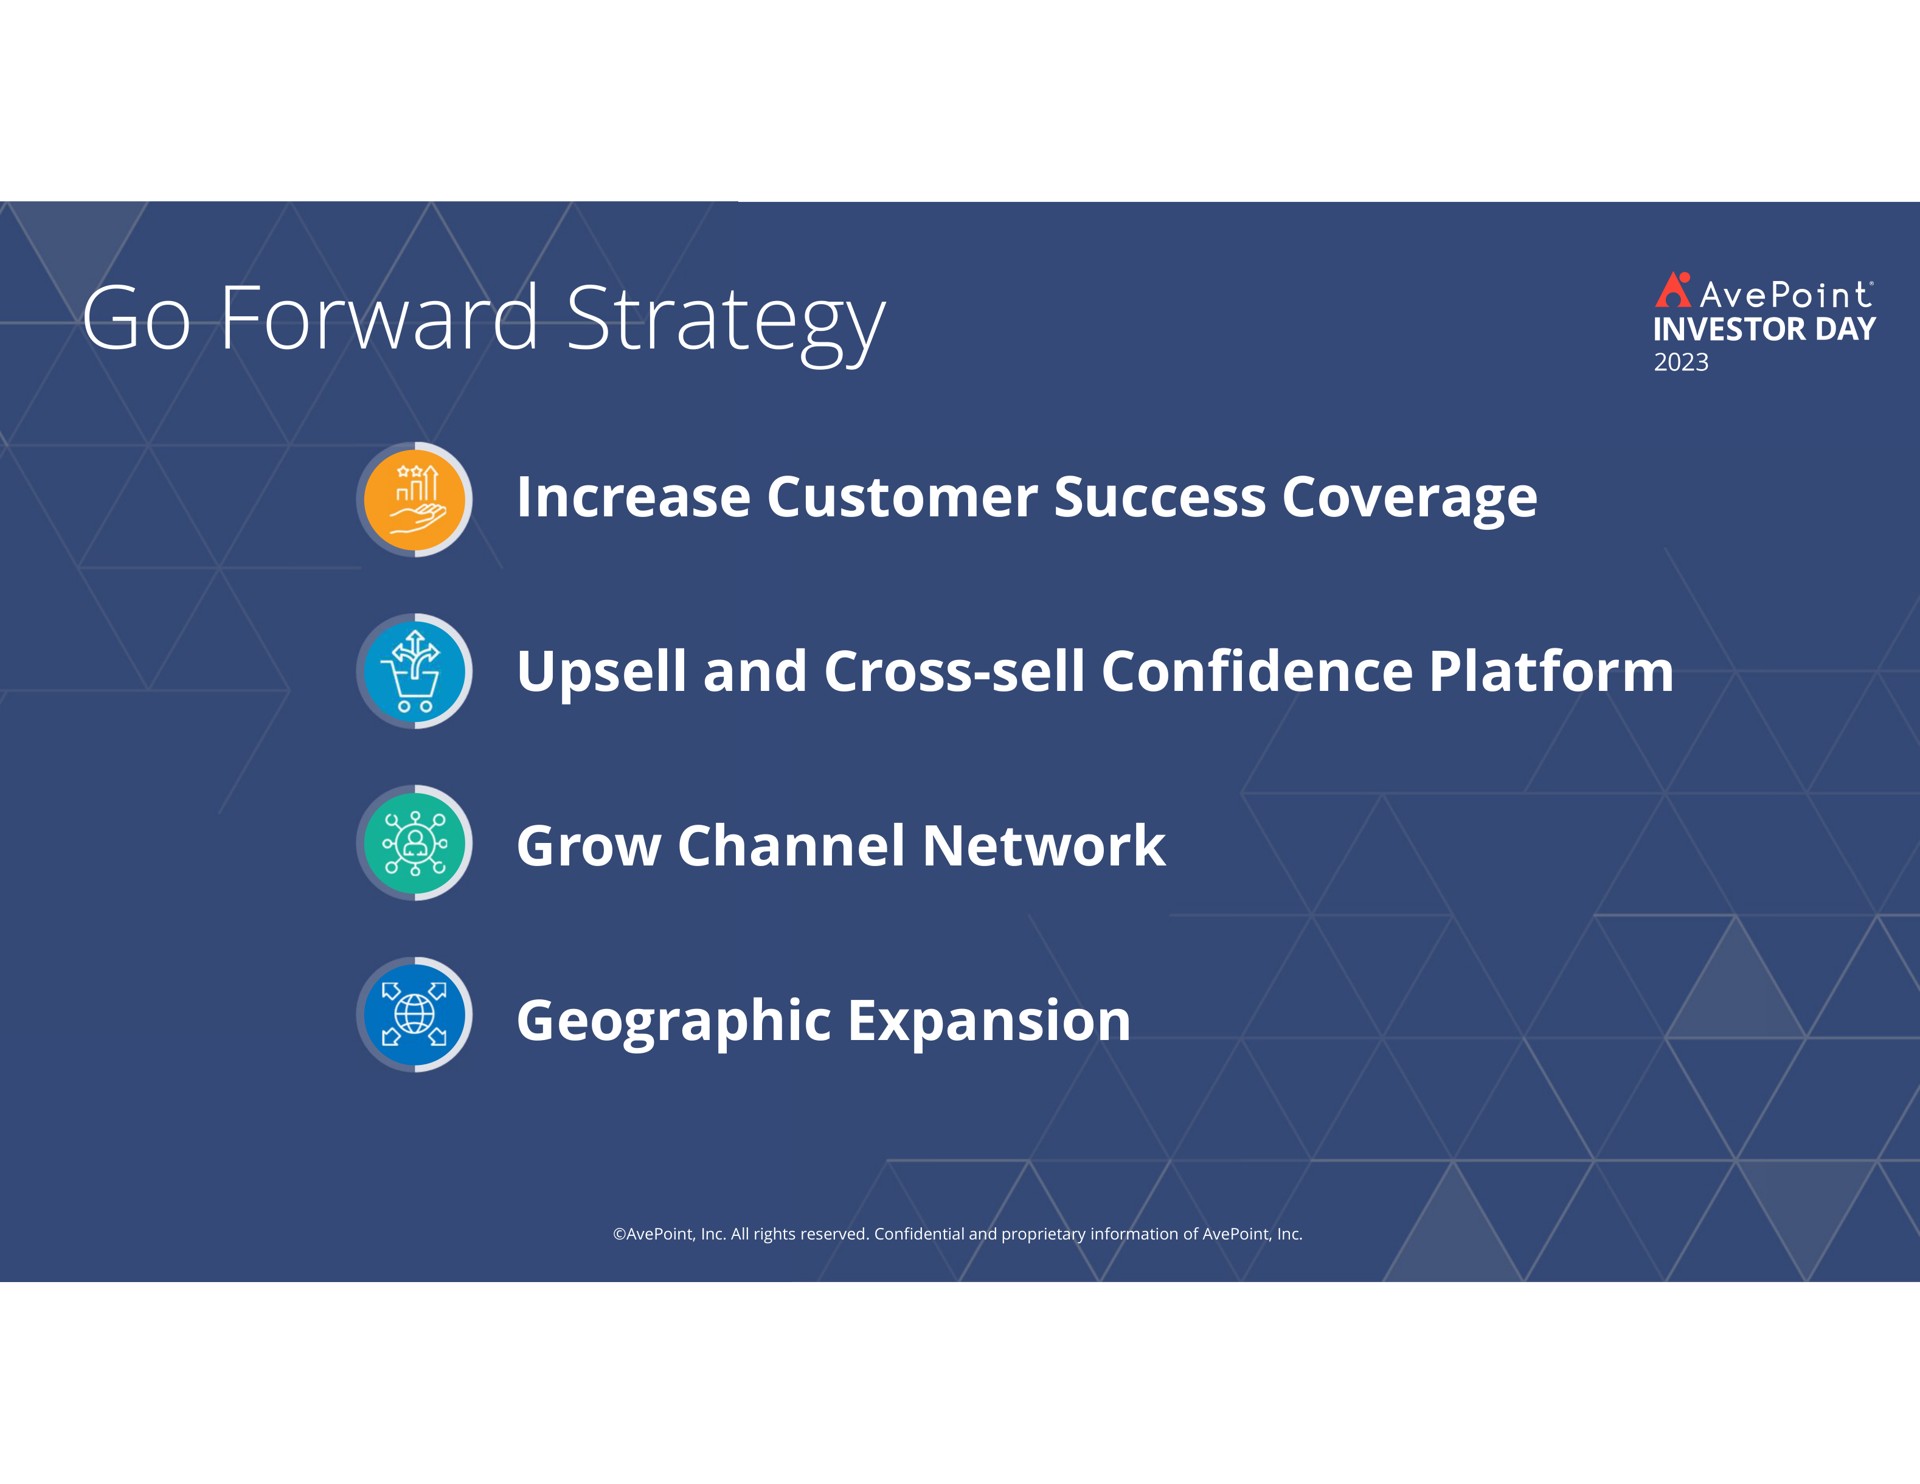 go forward strategy increase customer success coverage and cross sell confidence platform grow channel network geographic expansion | AvePoint